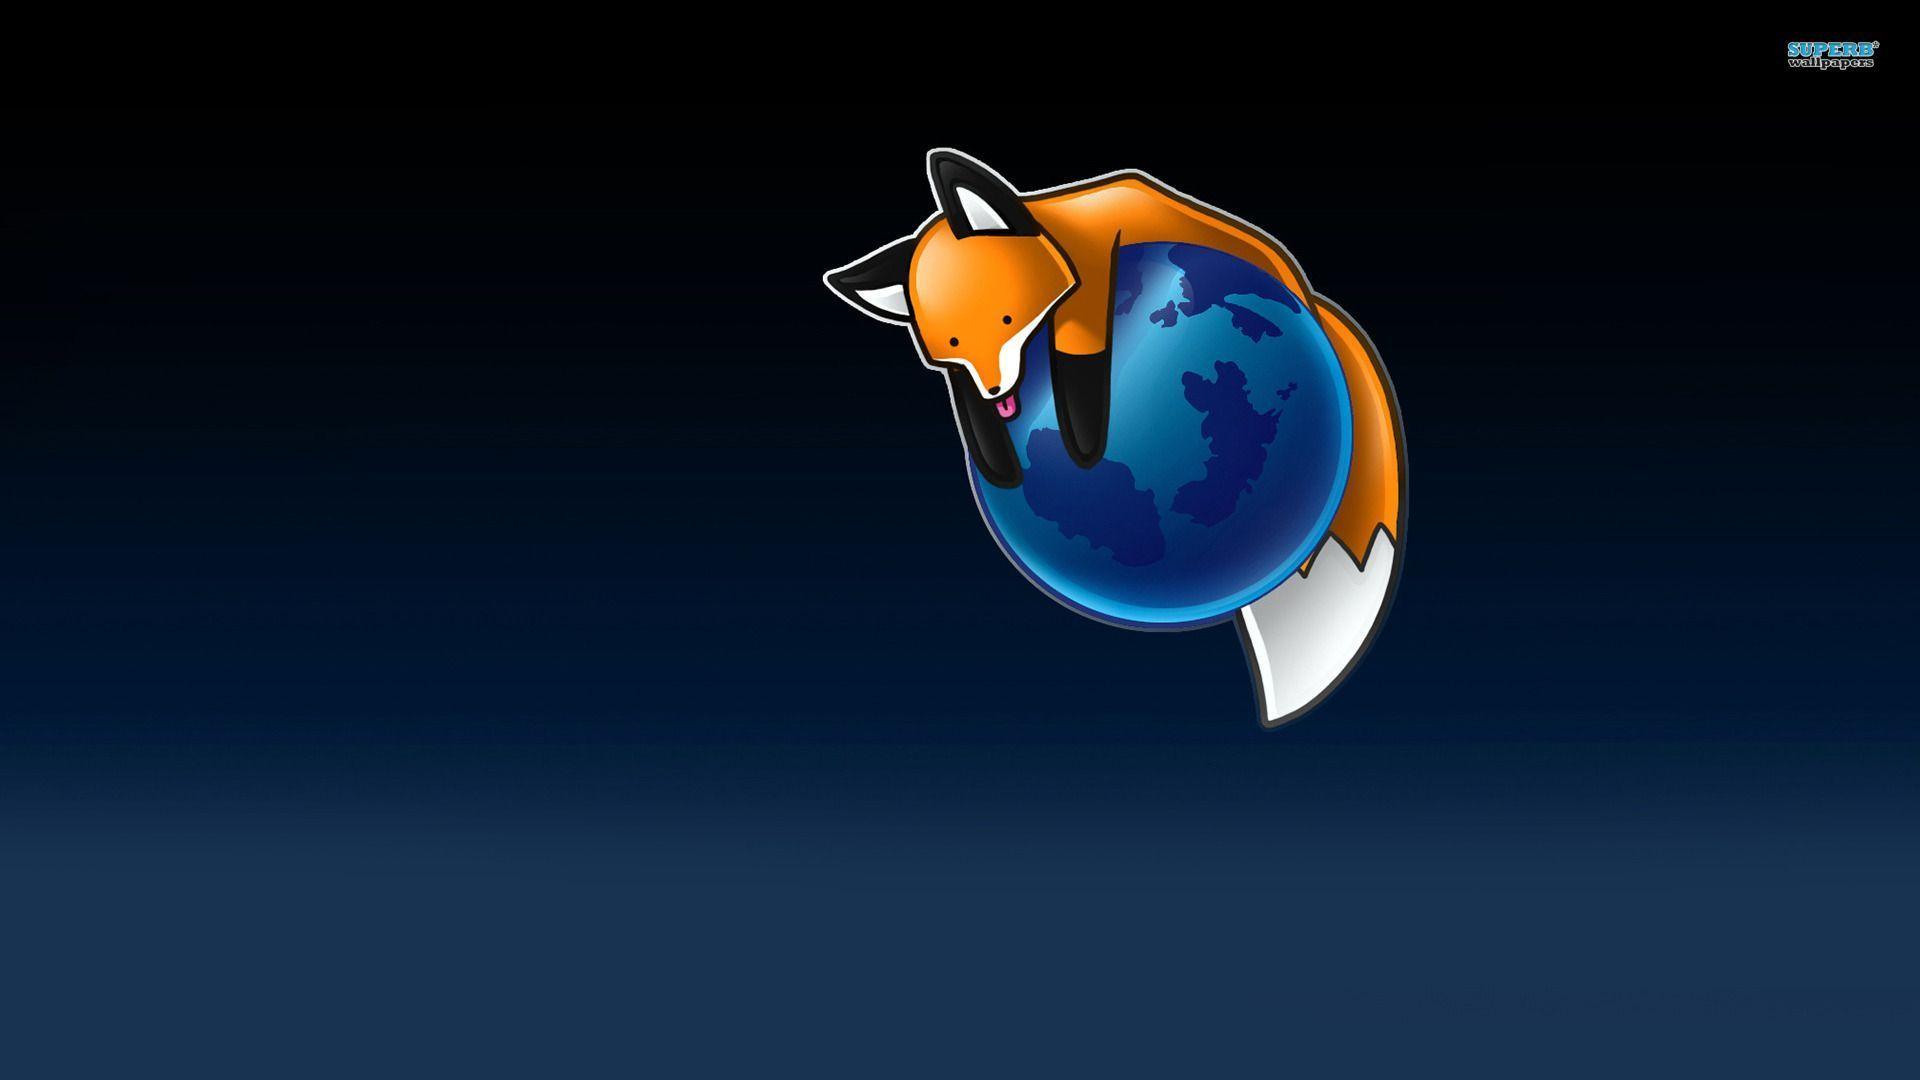 Beautiful Mozilla Firefox Browser and OS Wallpaper